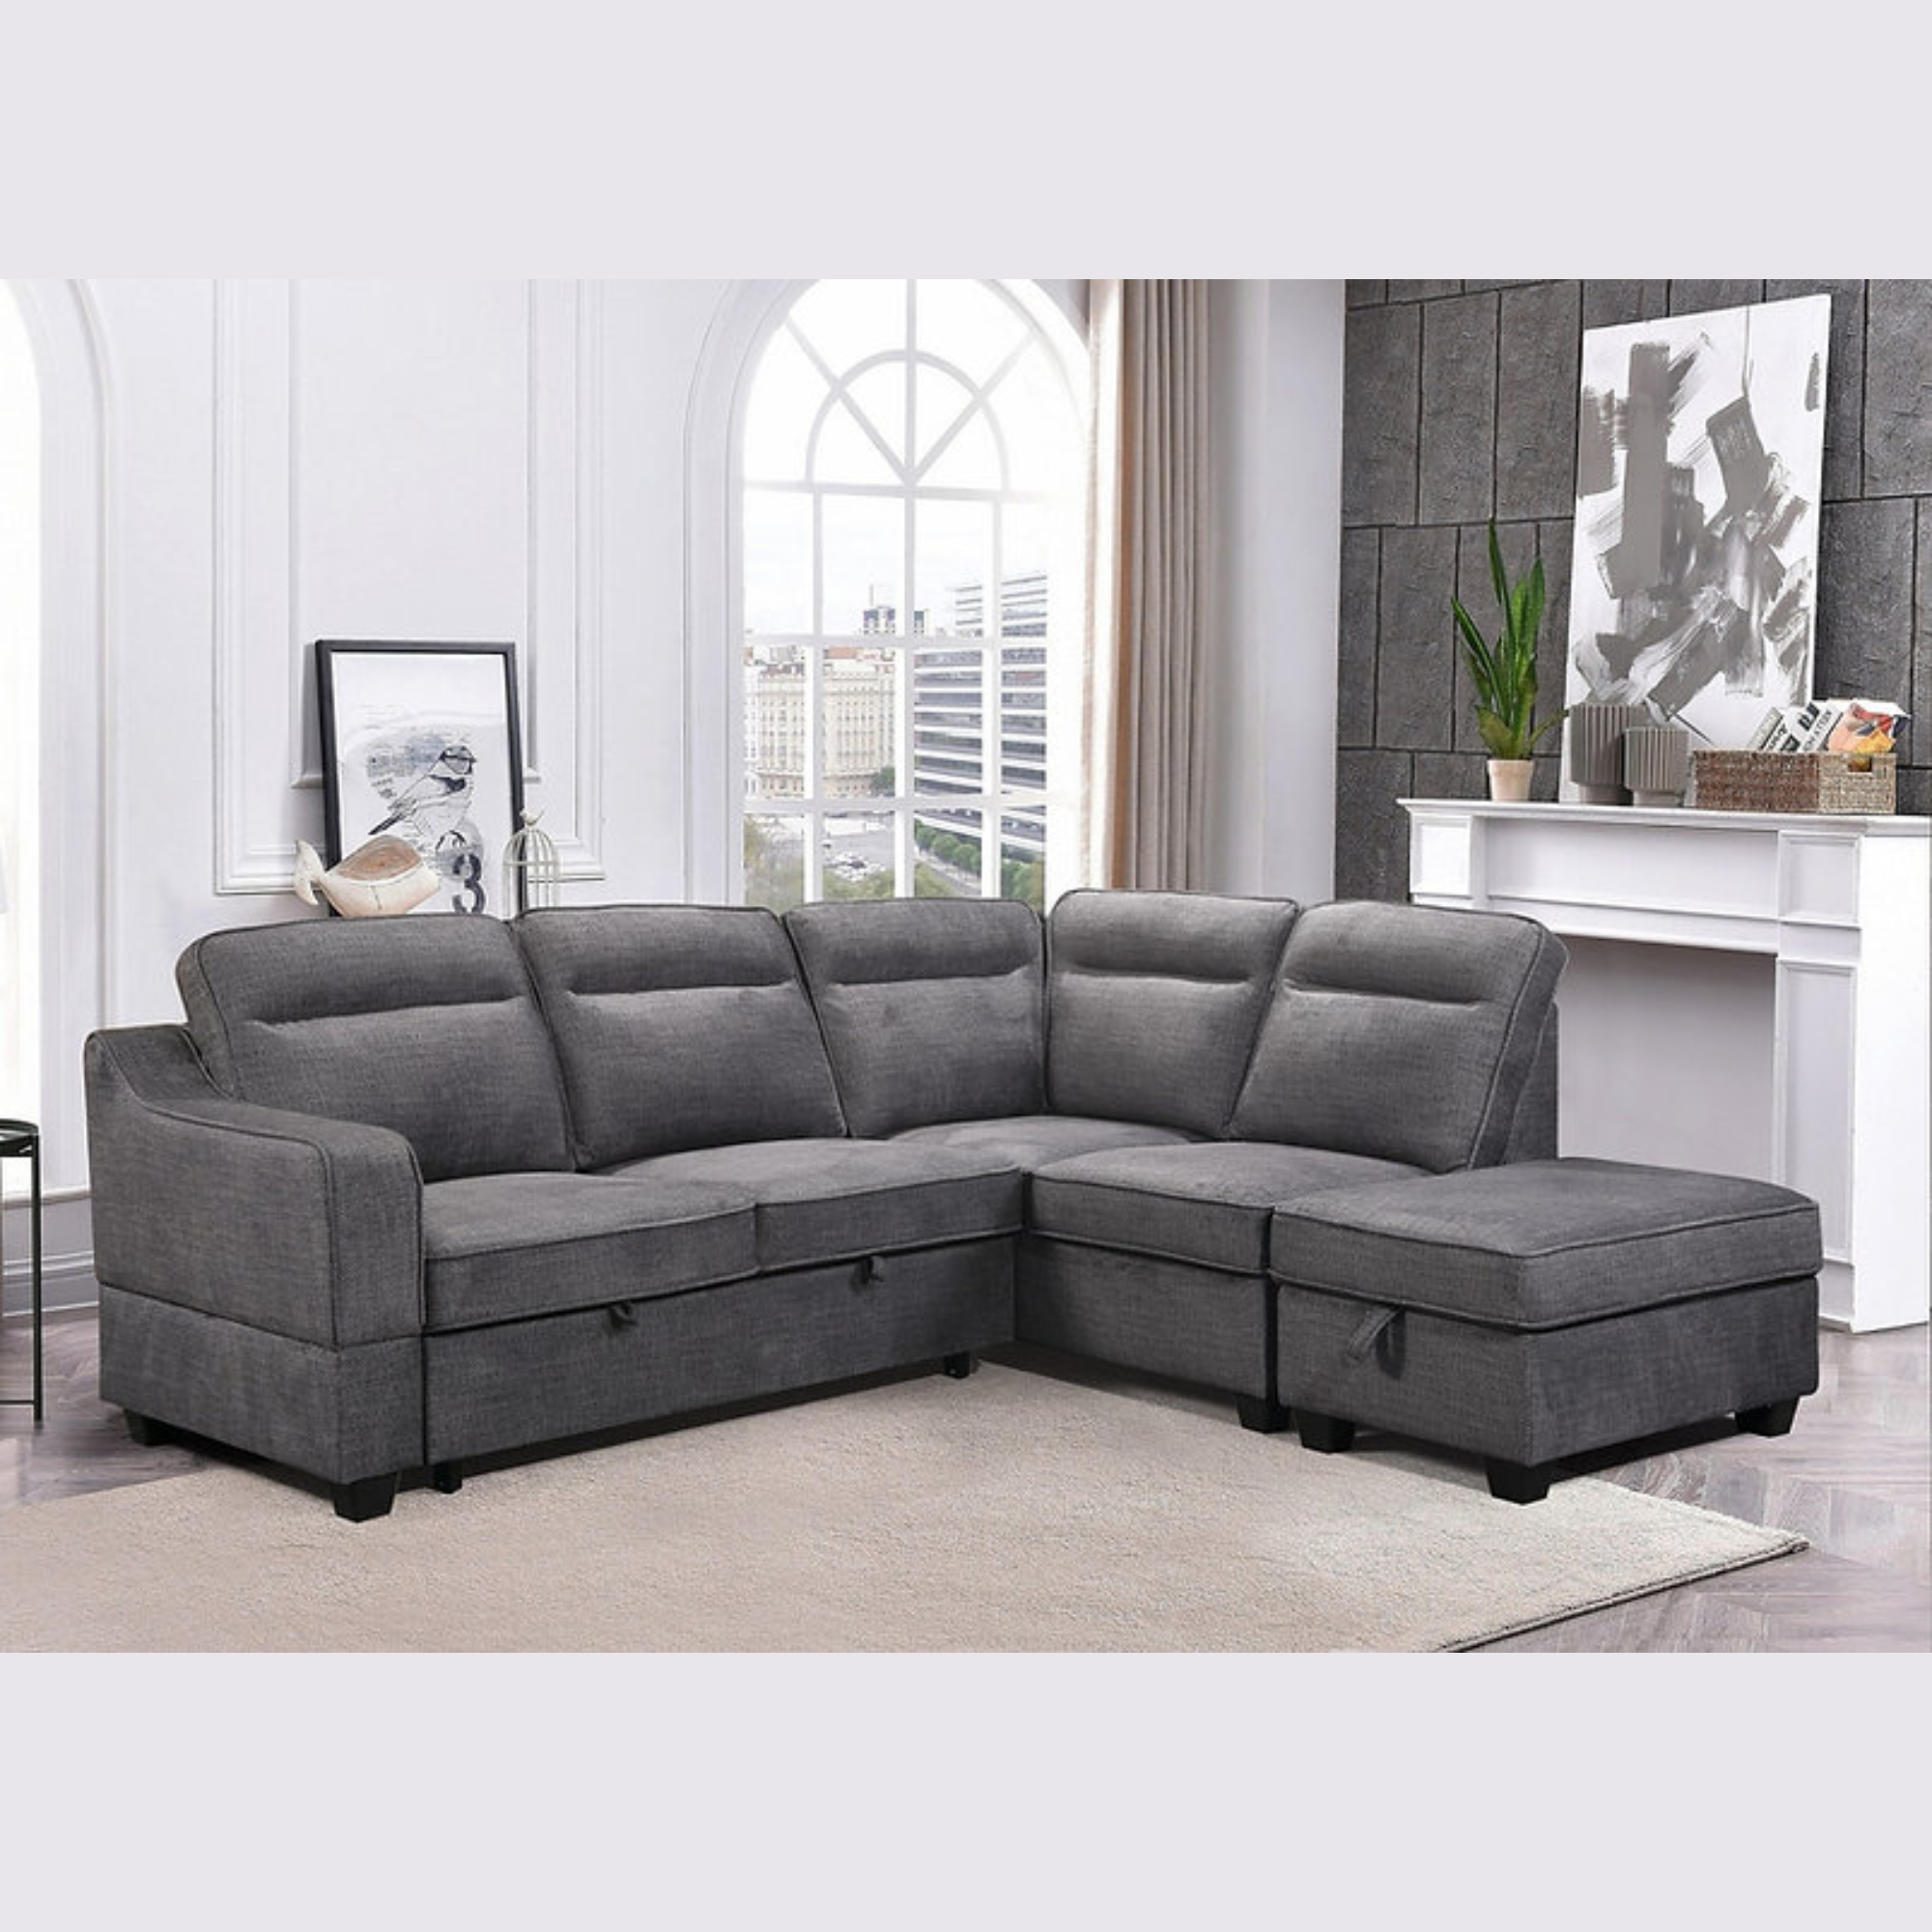 IF-9010 RHF Sofa Bed Sectional